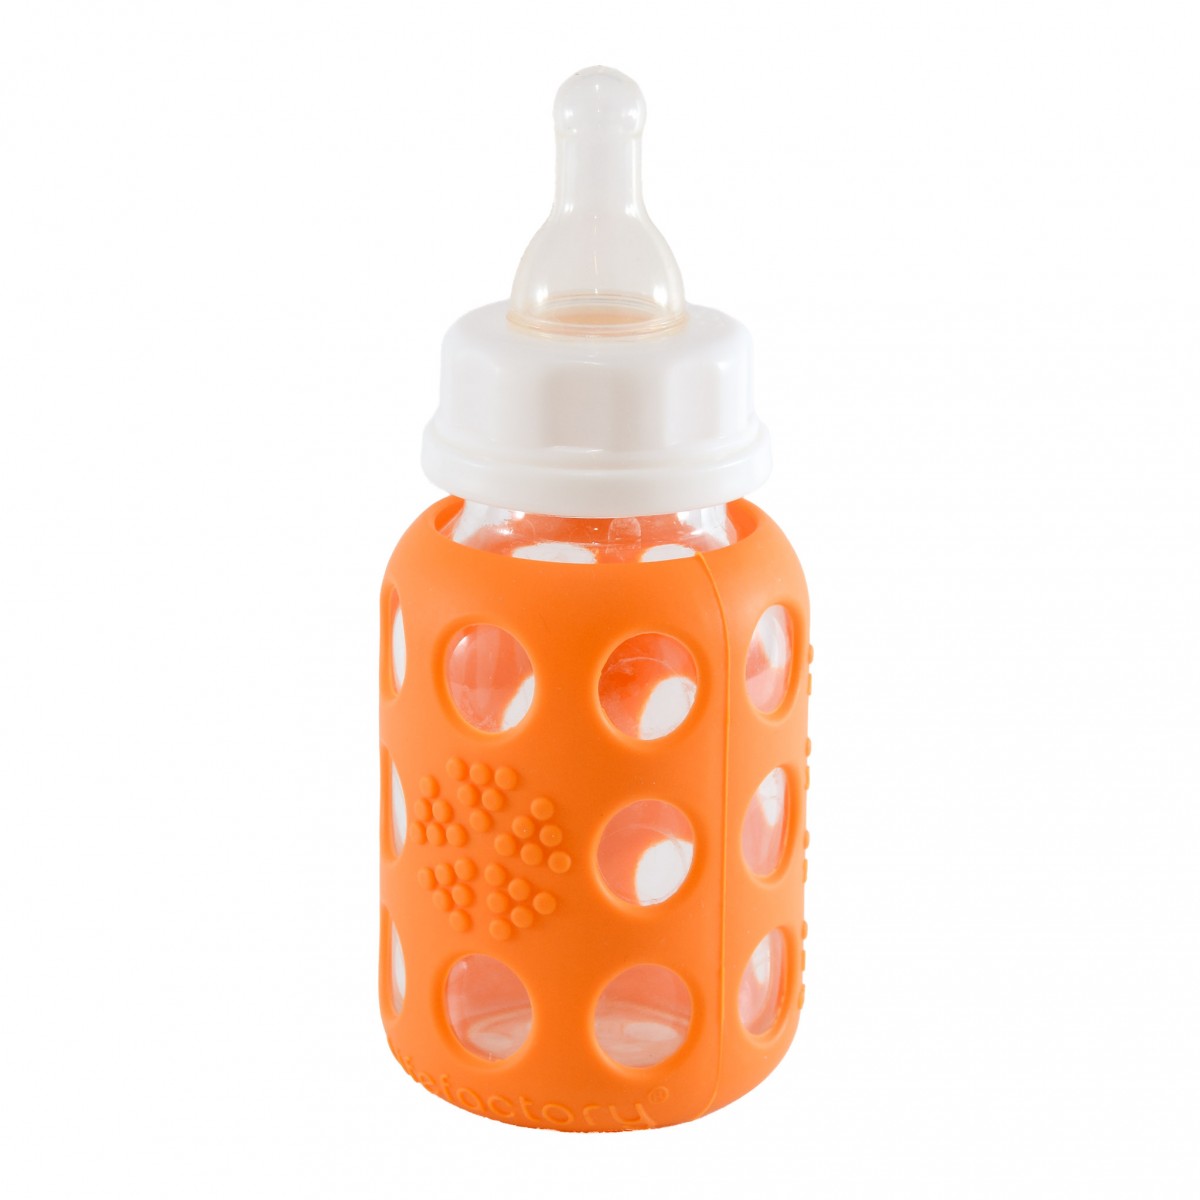 lifefactory glass bottle baby bottle review